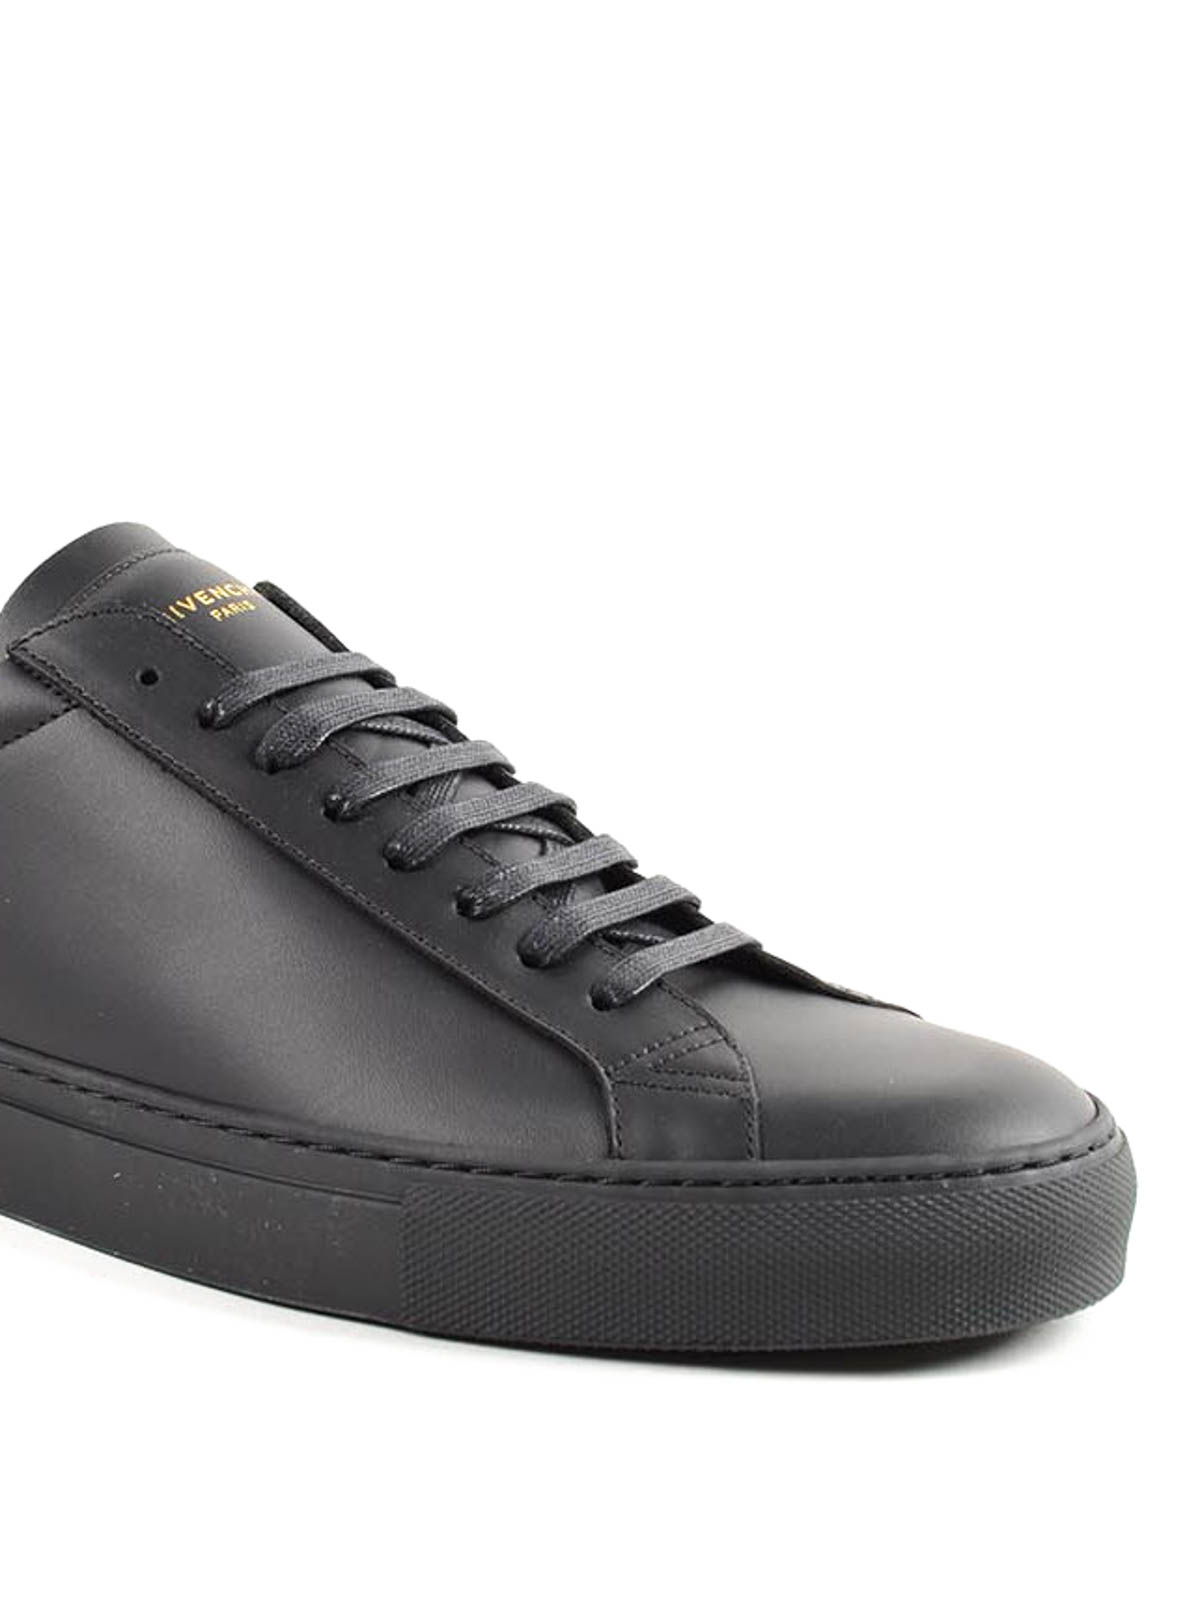 givenchy black leather sneakers